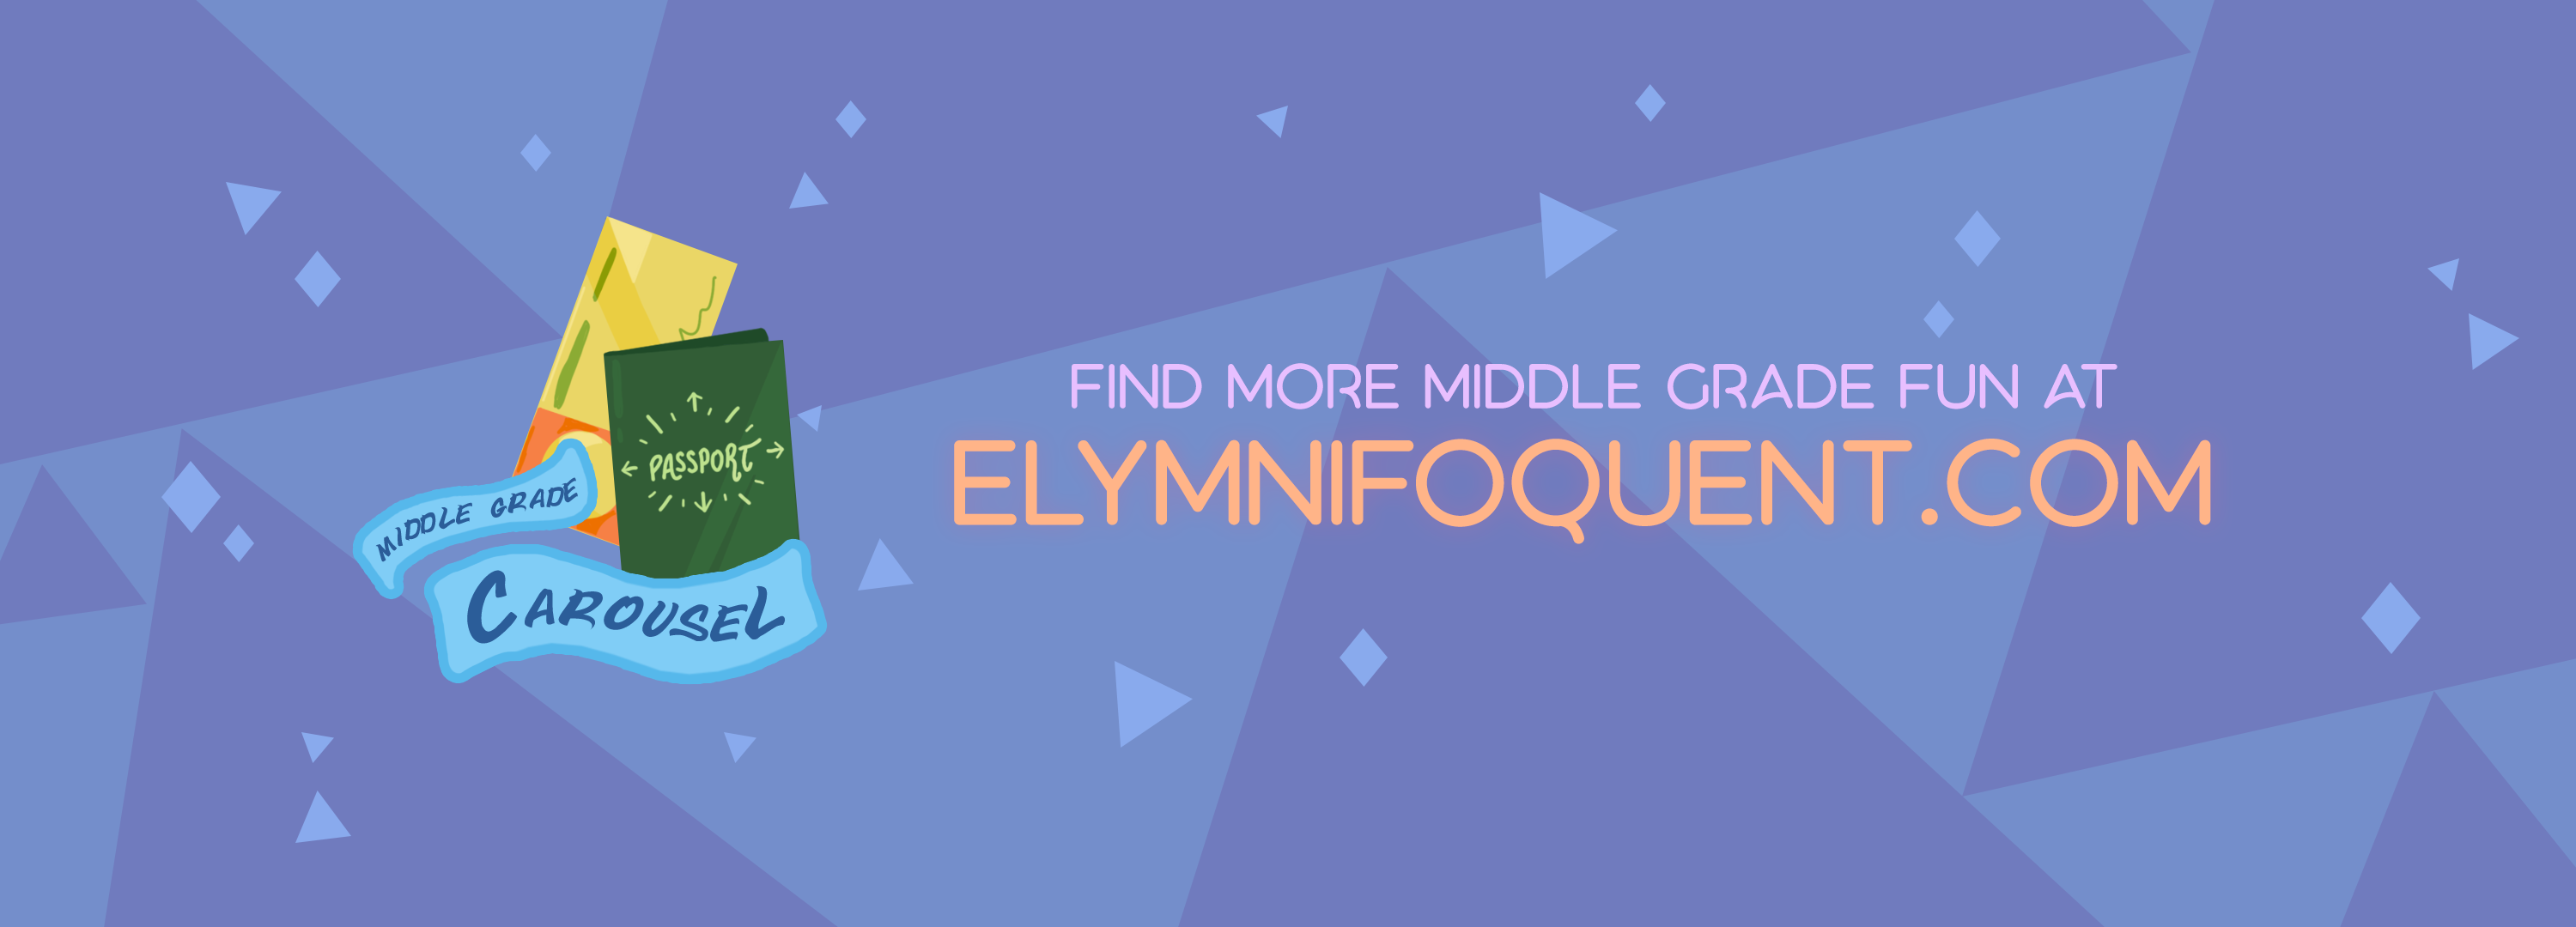 Social media banner for Middle Grade Carousel's Travel reading challenge, December 2021. Text reads "find more Middle Grade fun at Elymnifoquent.com".